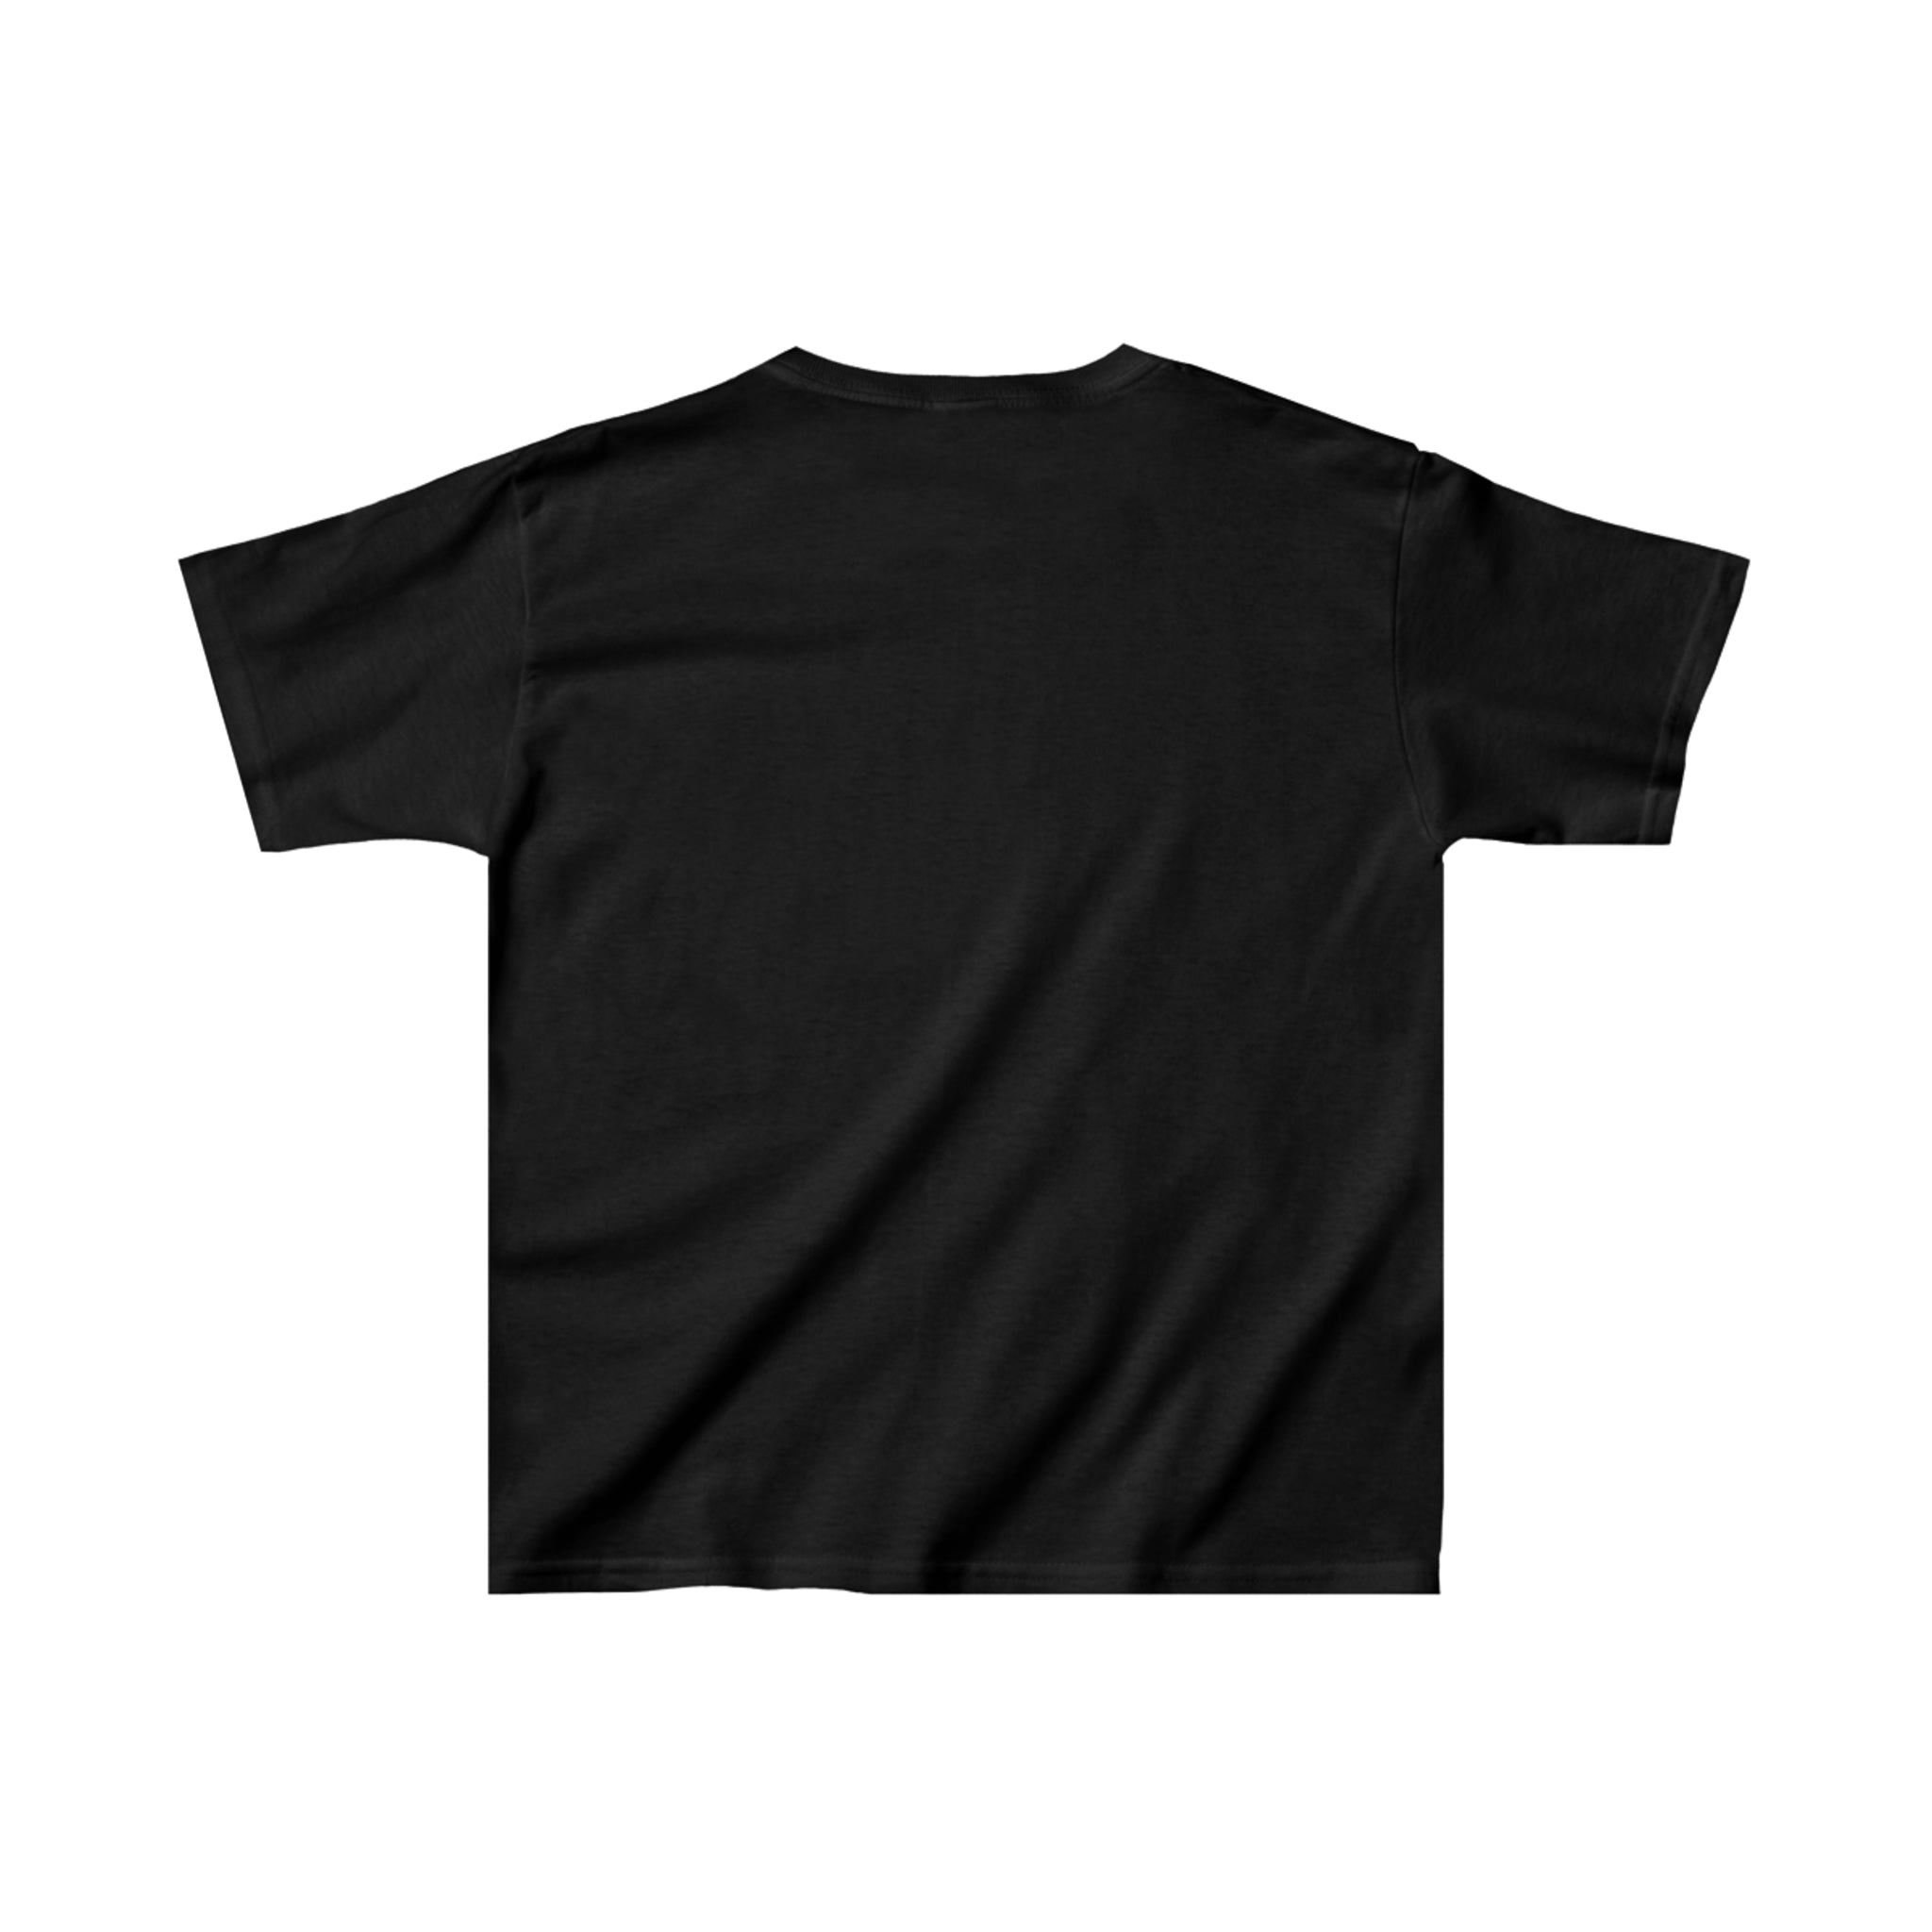 Erie Panthers T-Shirt (Youth)